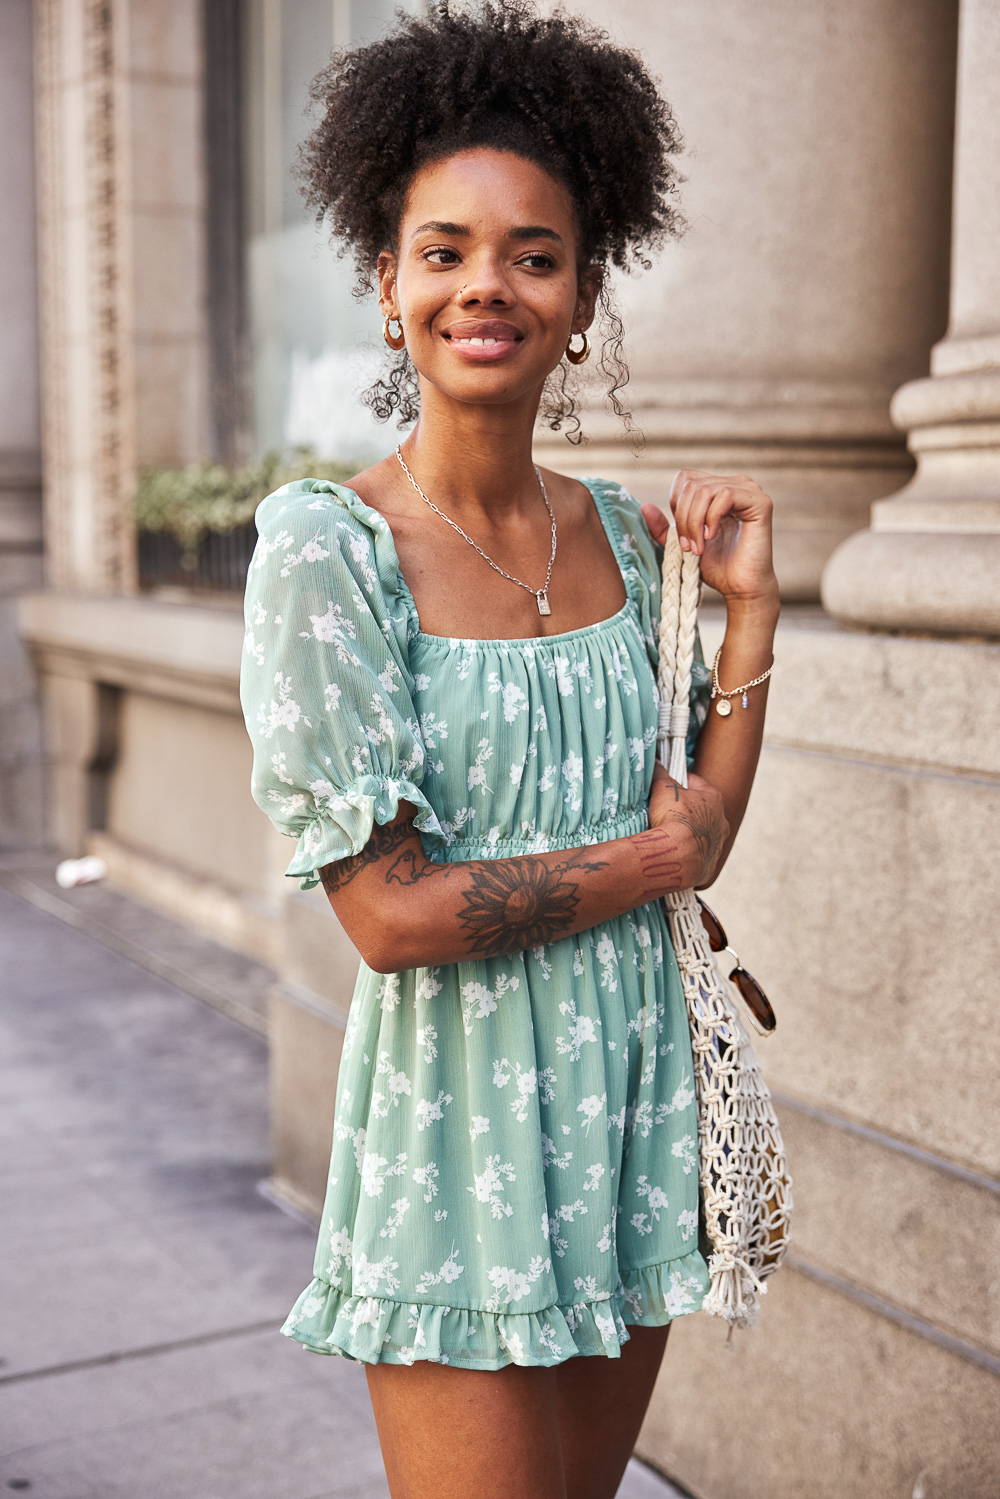 Trixxi Back to school embracing dorm life, walking in the city in a sage green floral romper.